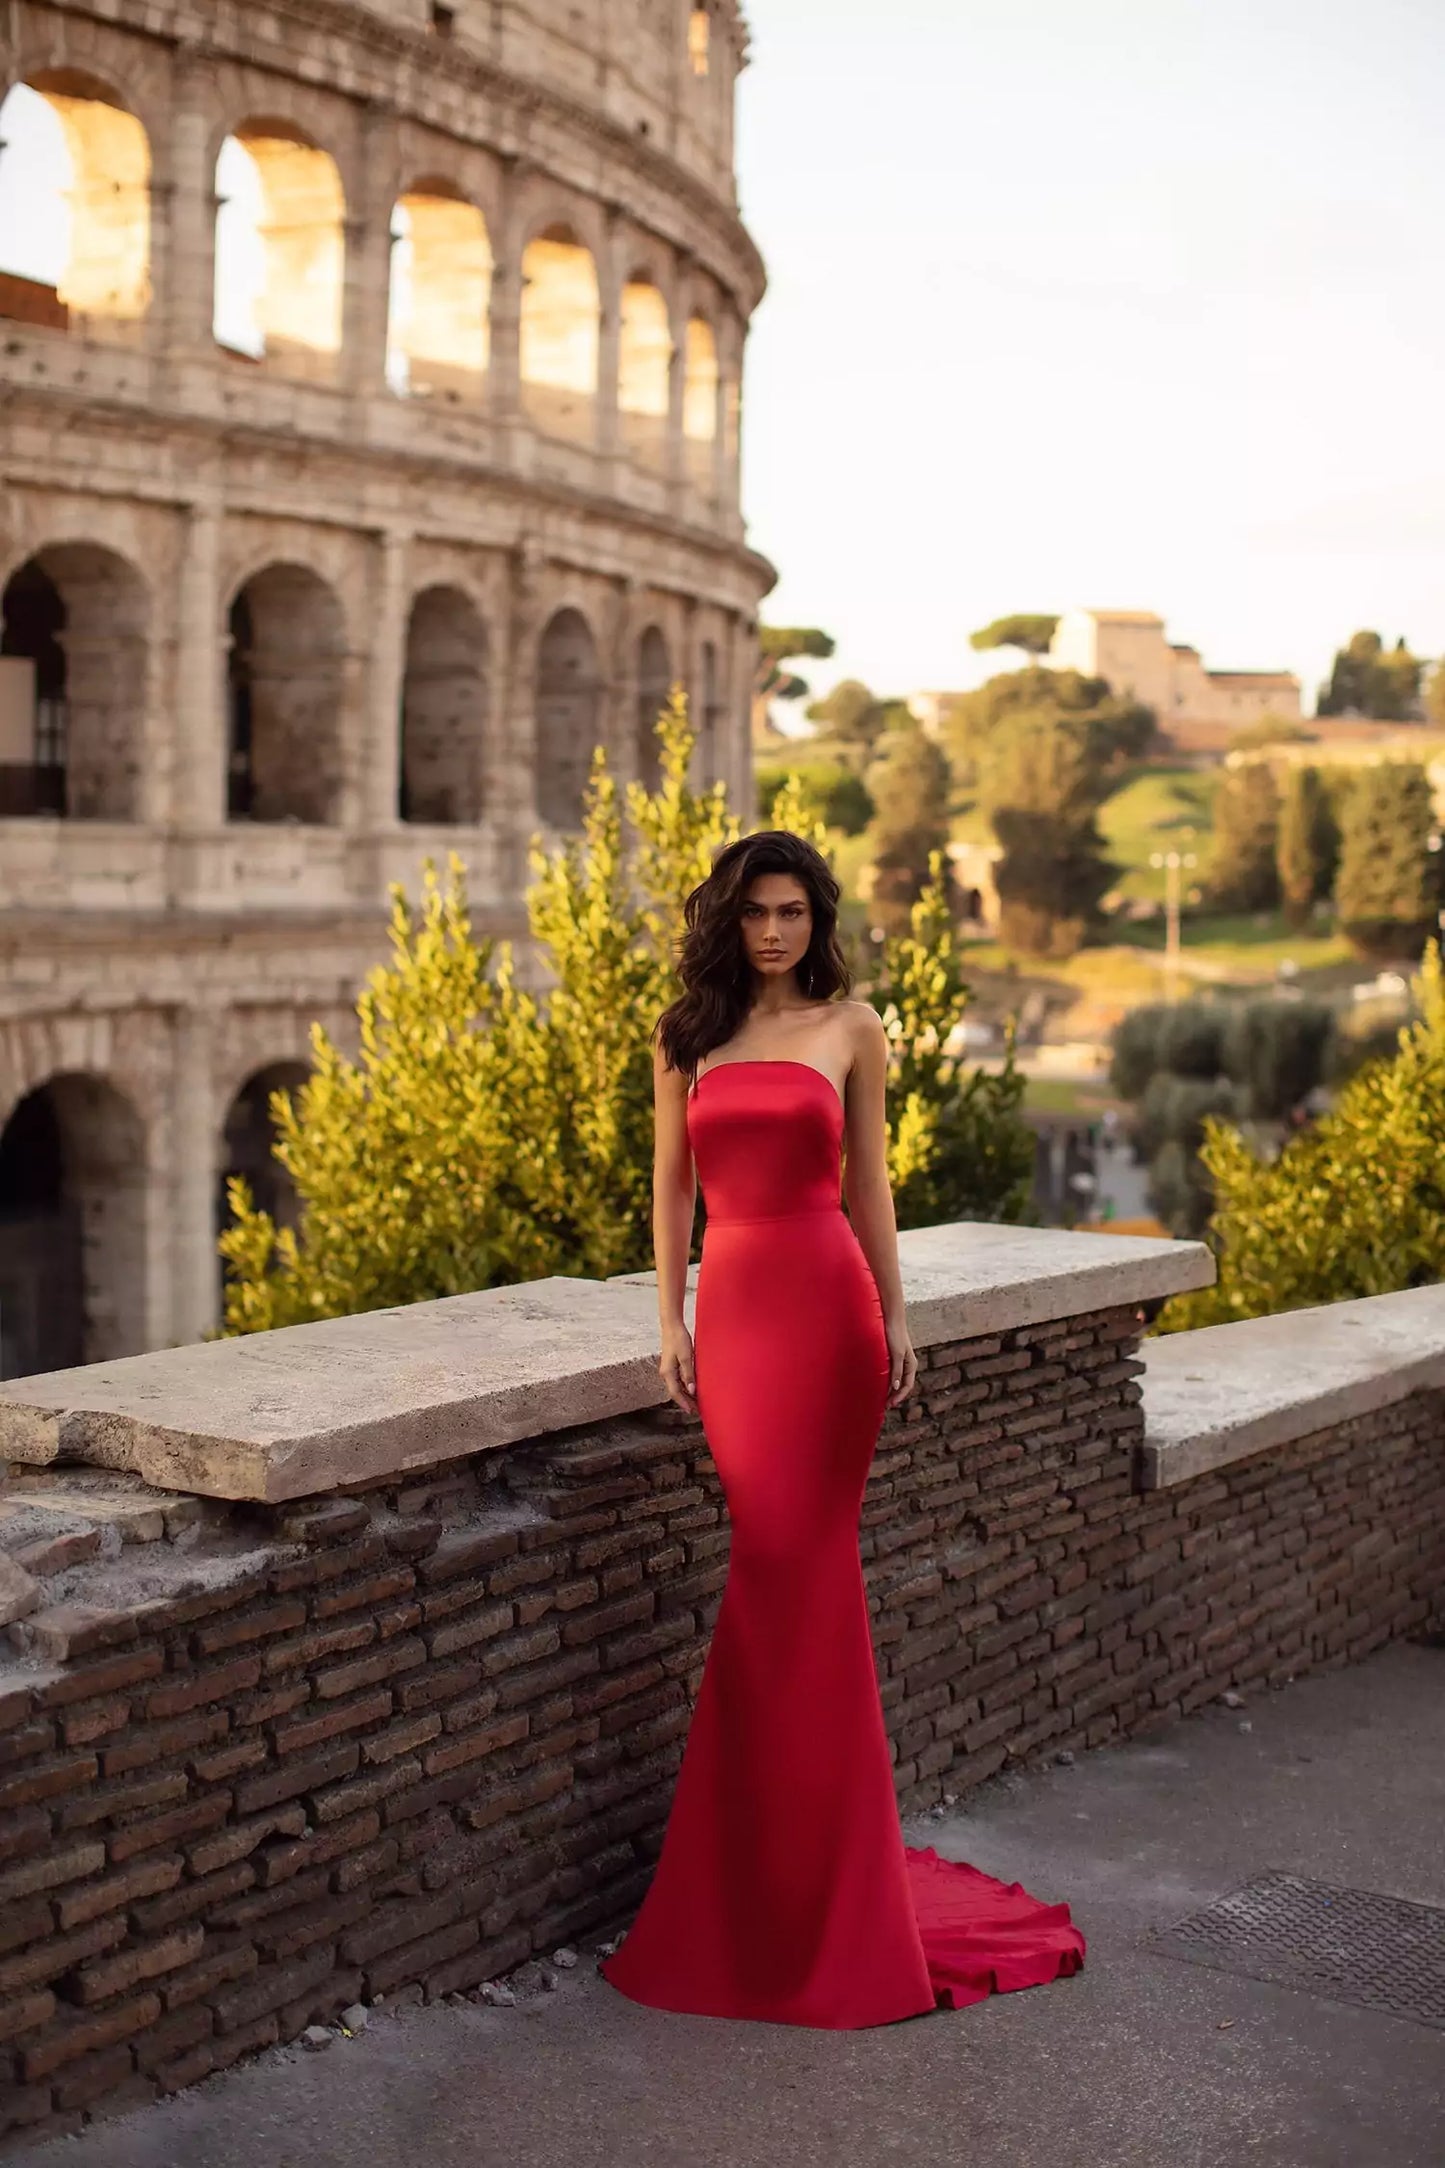 A woman in a red gown is posing in front of the colosseum